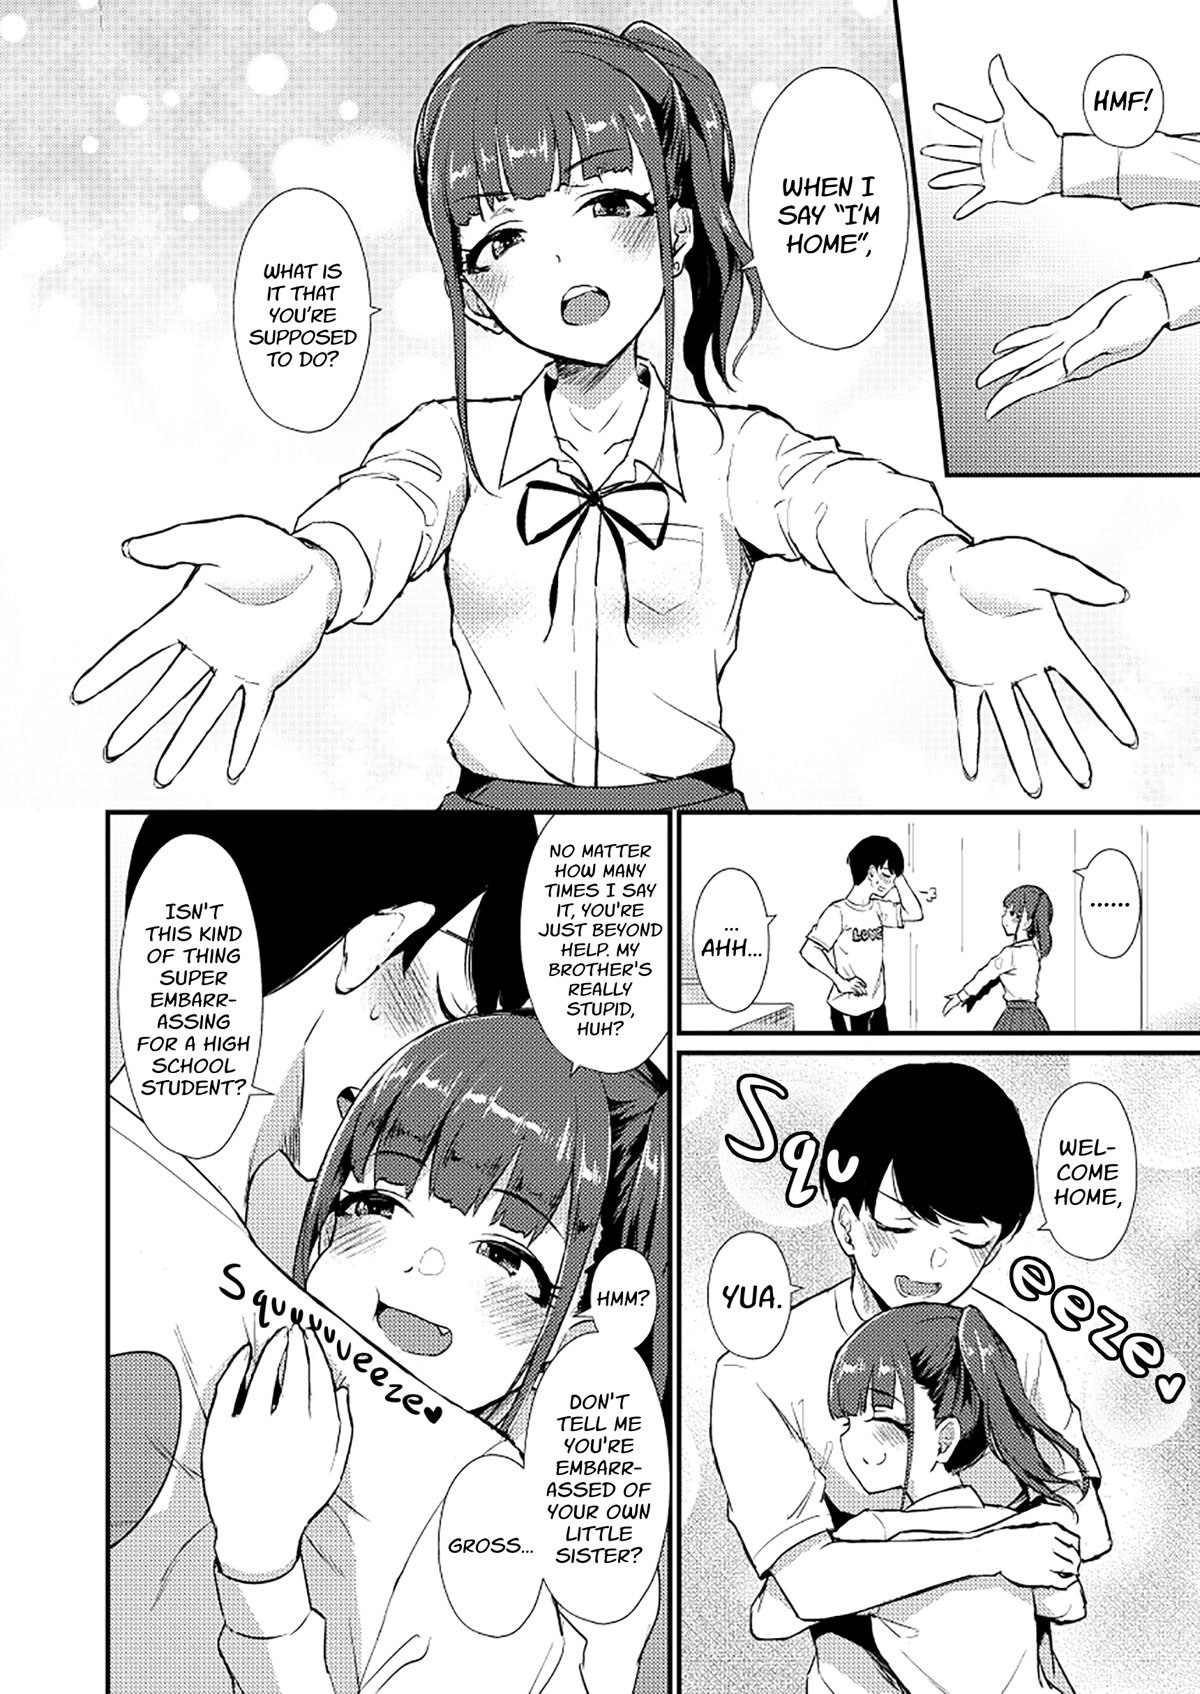 A Story Where All The Characters Are Super Yandere - Page 2